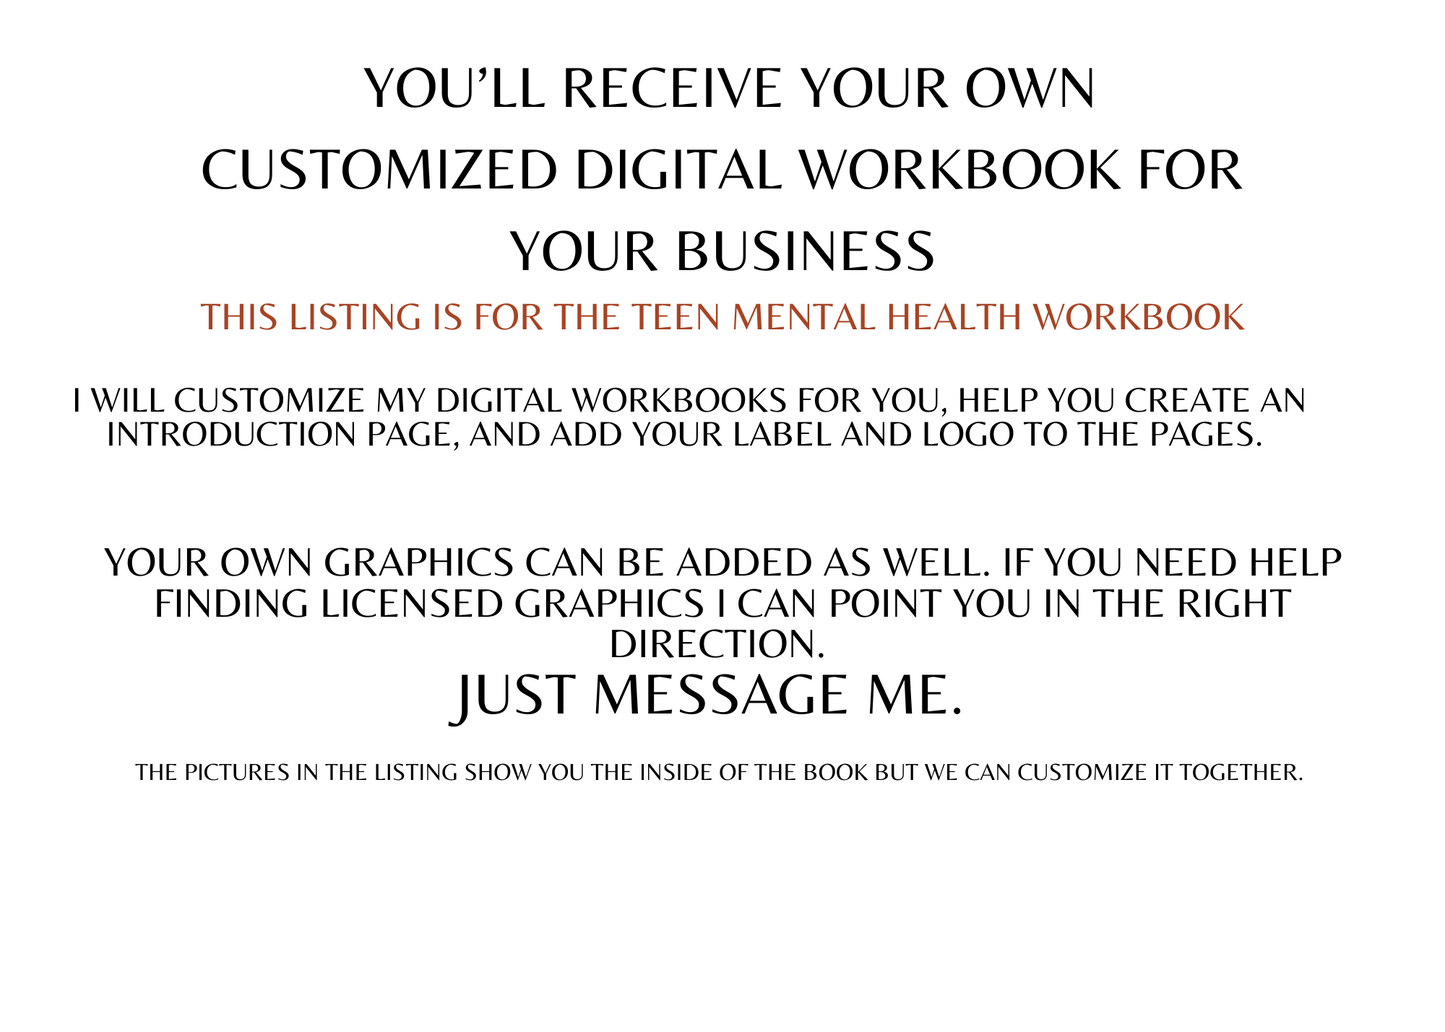 Custom Digital Love Worth Workbook- For Goodnotes,- Full Customization For Your Business- Done For You Digital Product- PLR Custom Projects